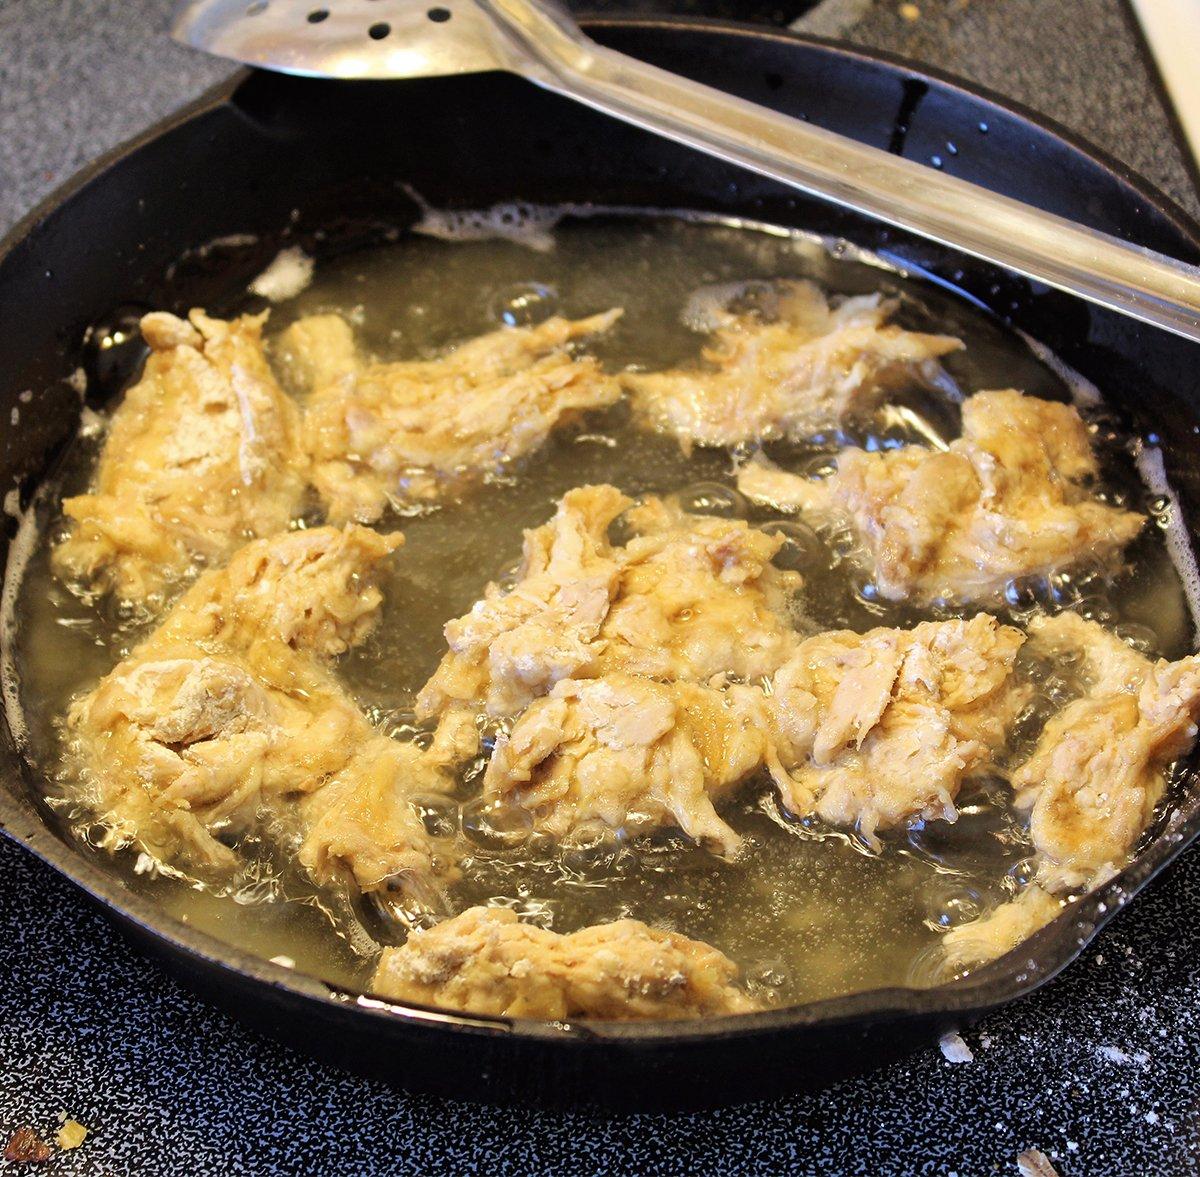 After coating the squirrel meat in beaten egg and seasoned flour, fry it to a crispy golden brown.